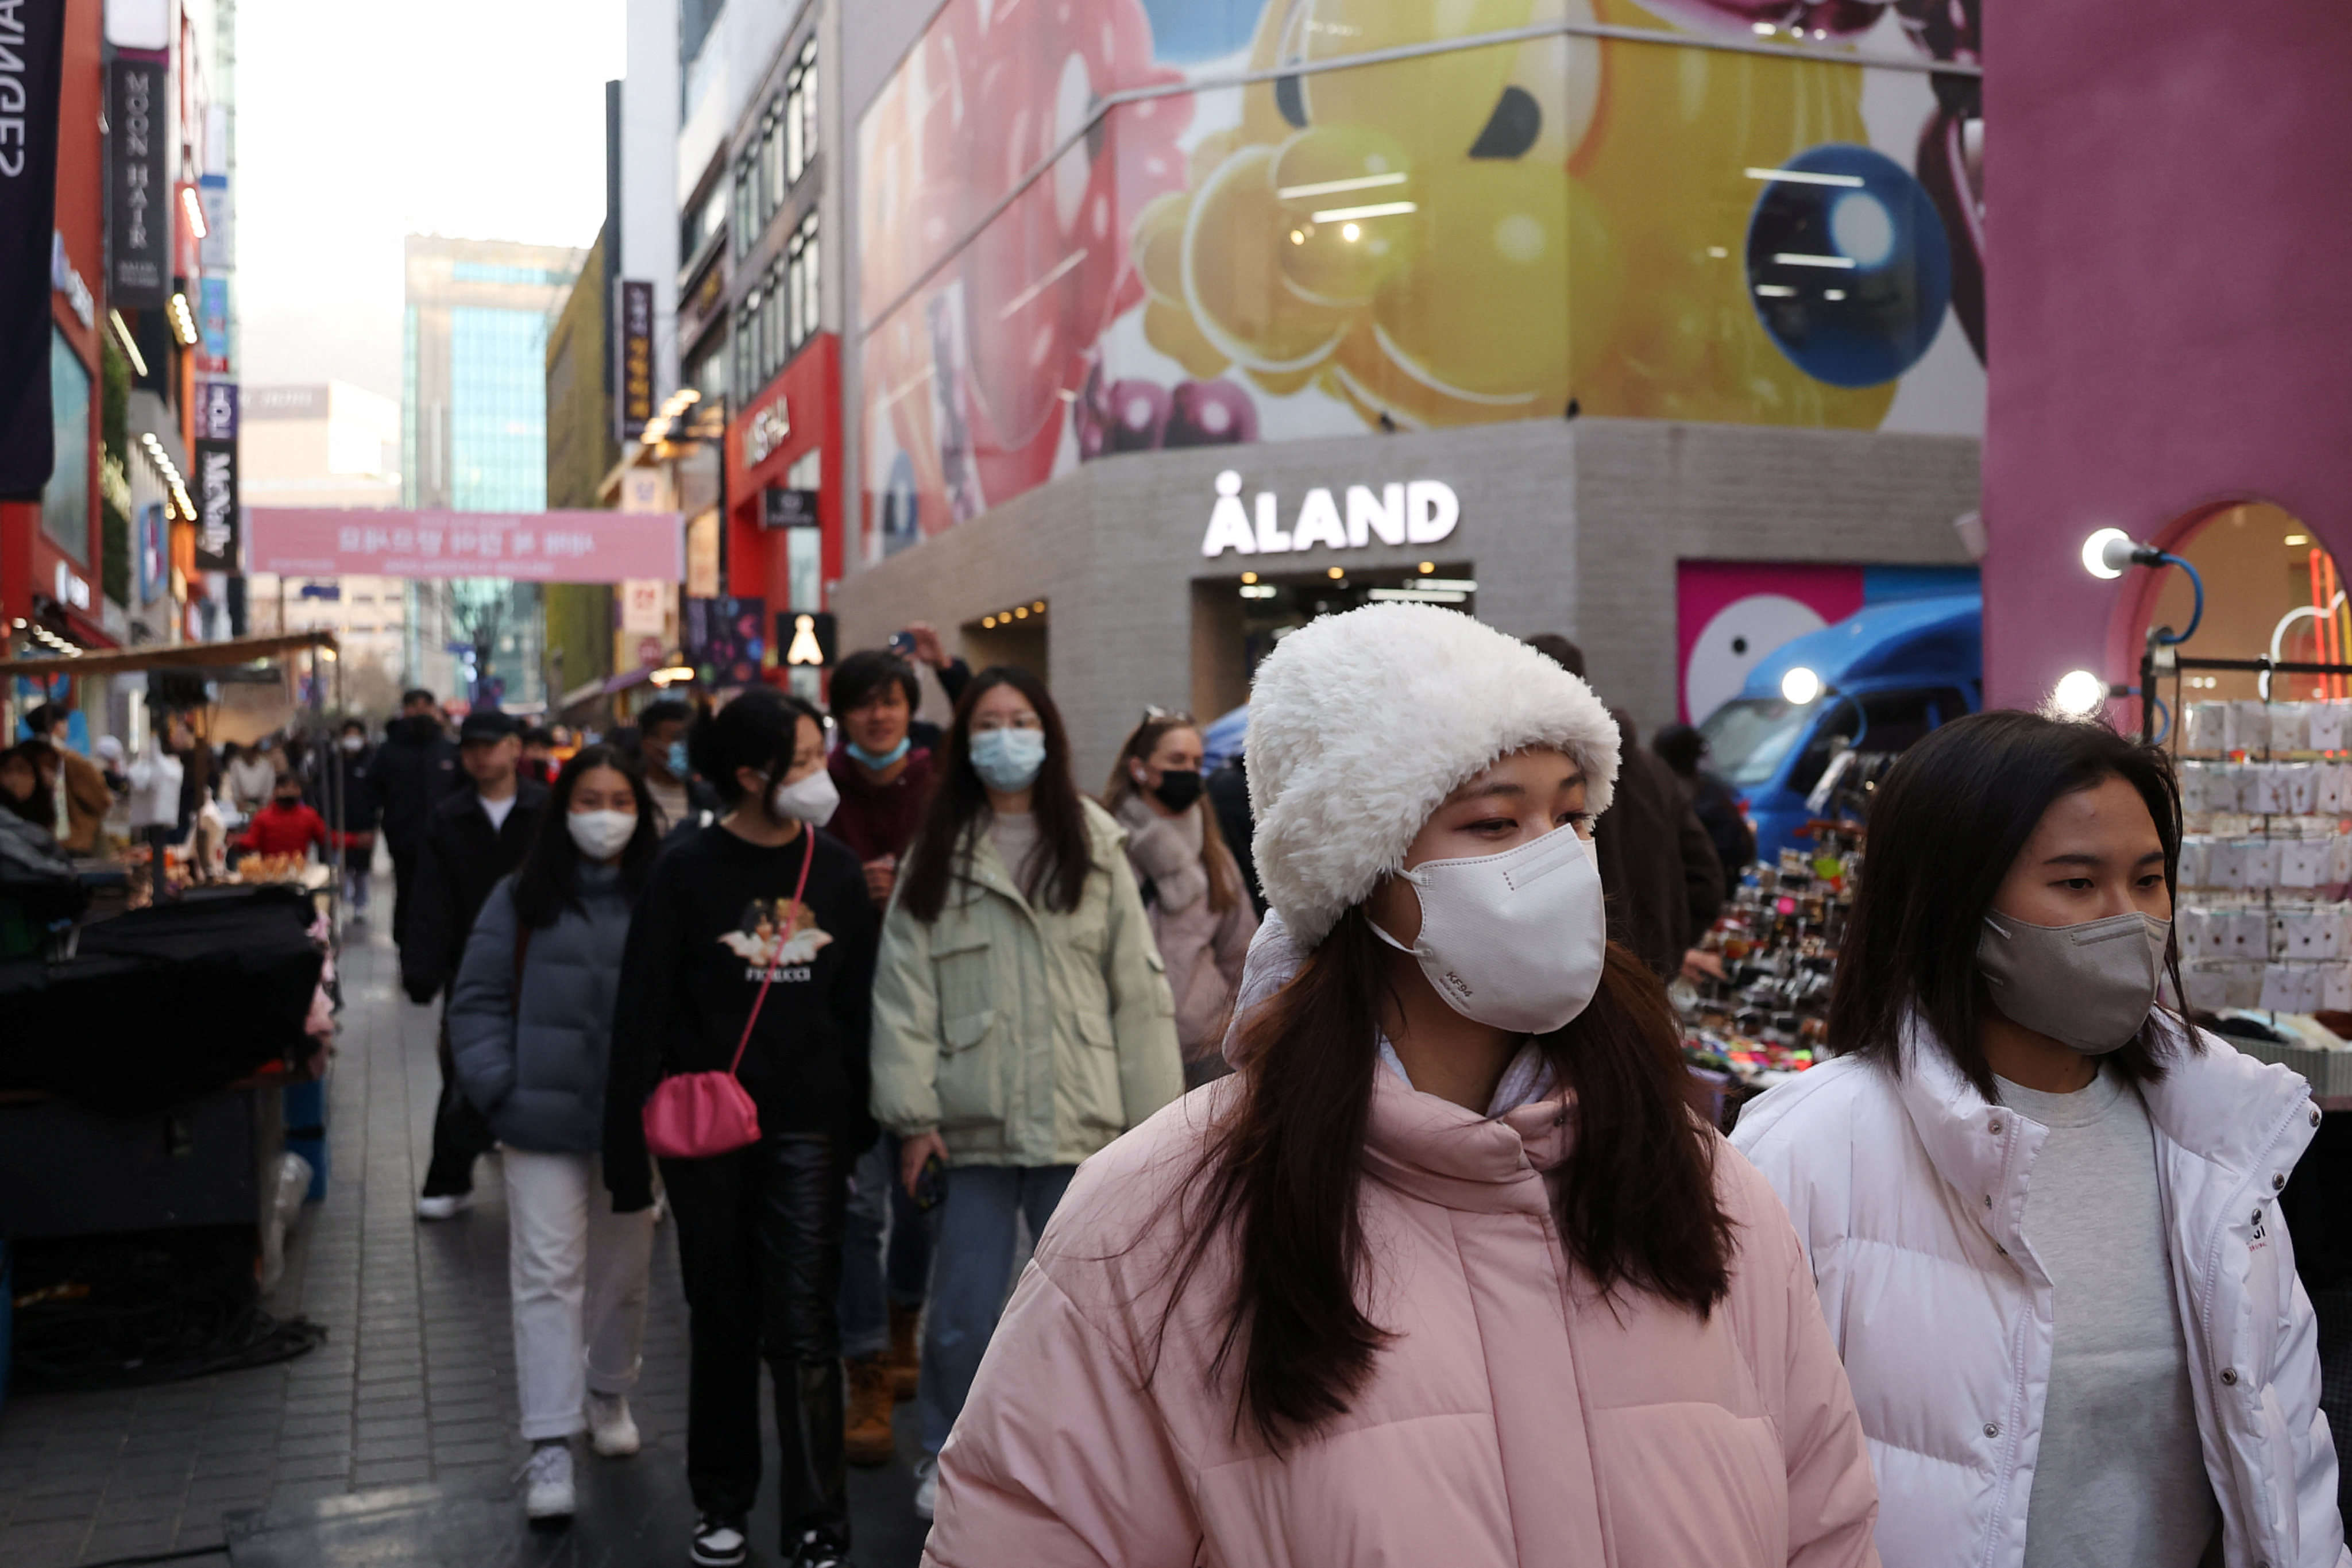 Tourists are returning to Myeong-dong, the popular shopping district in Seoul, South Korea, with many citing their love of K-dramas and K-pop as reasons for visiting. Photo: Reuters